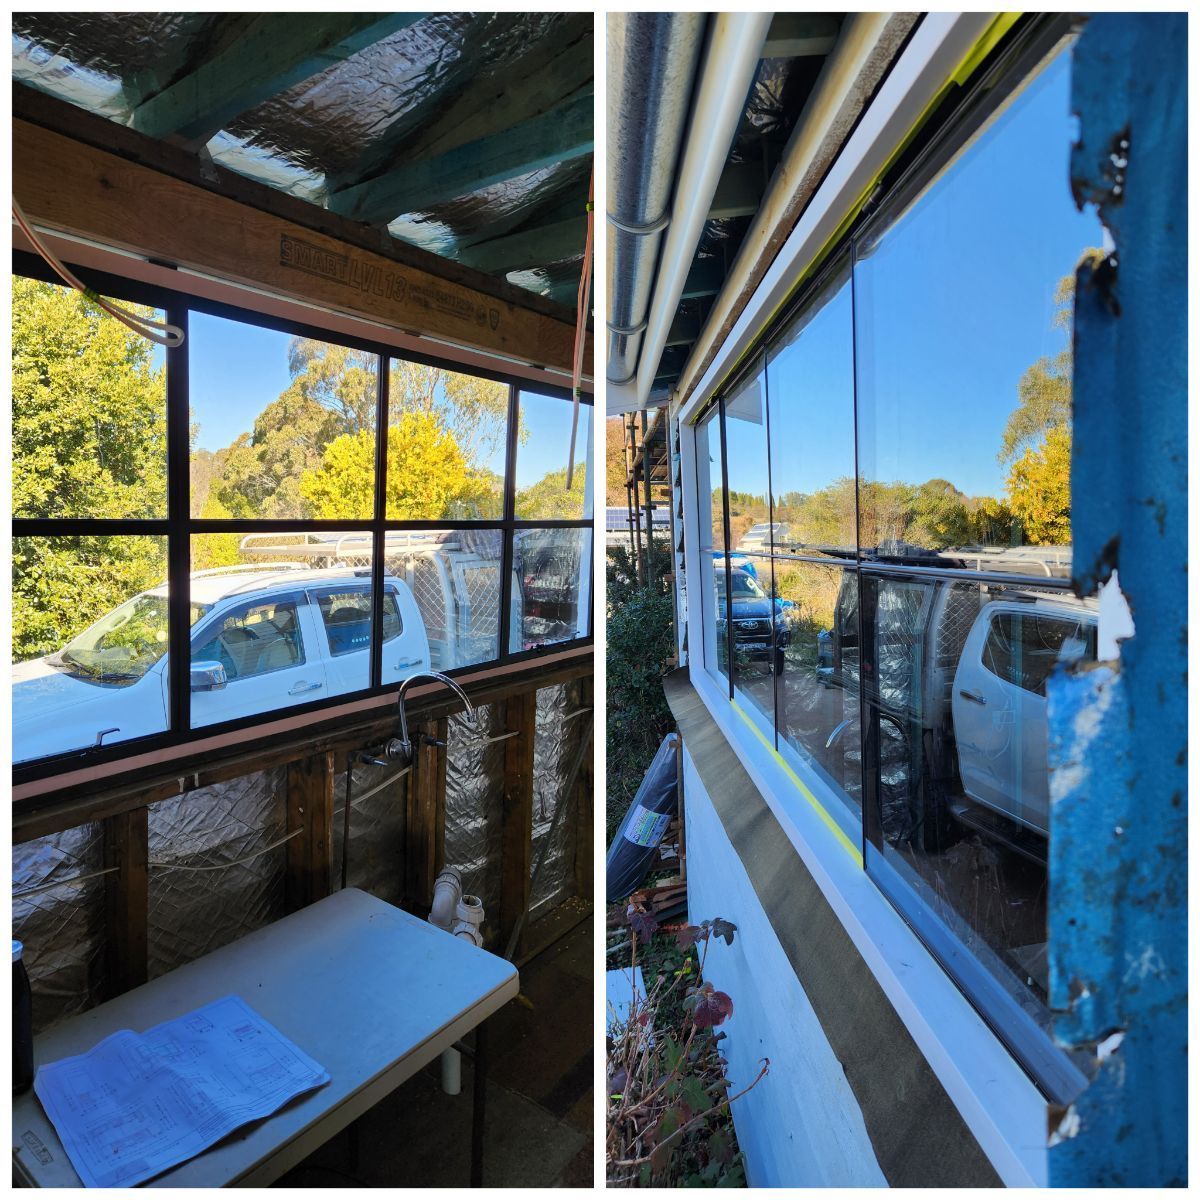 Window Repair - Glazier in the Southern Highlands